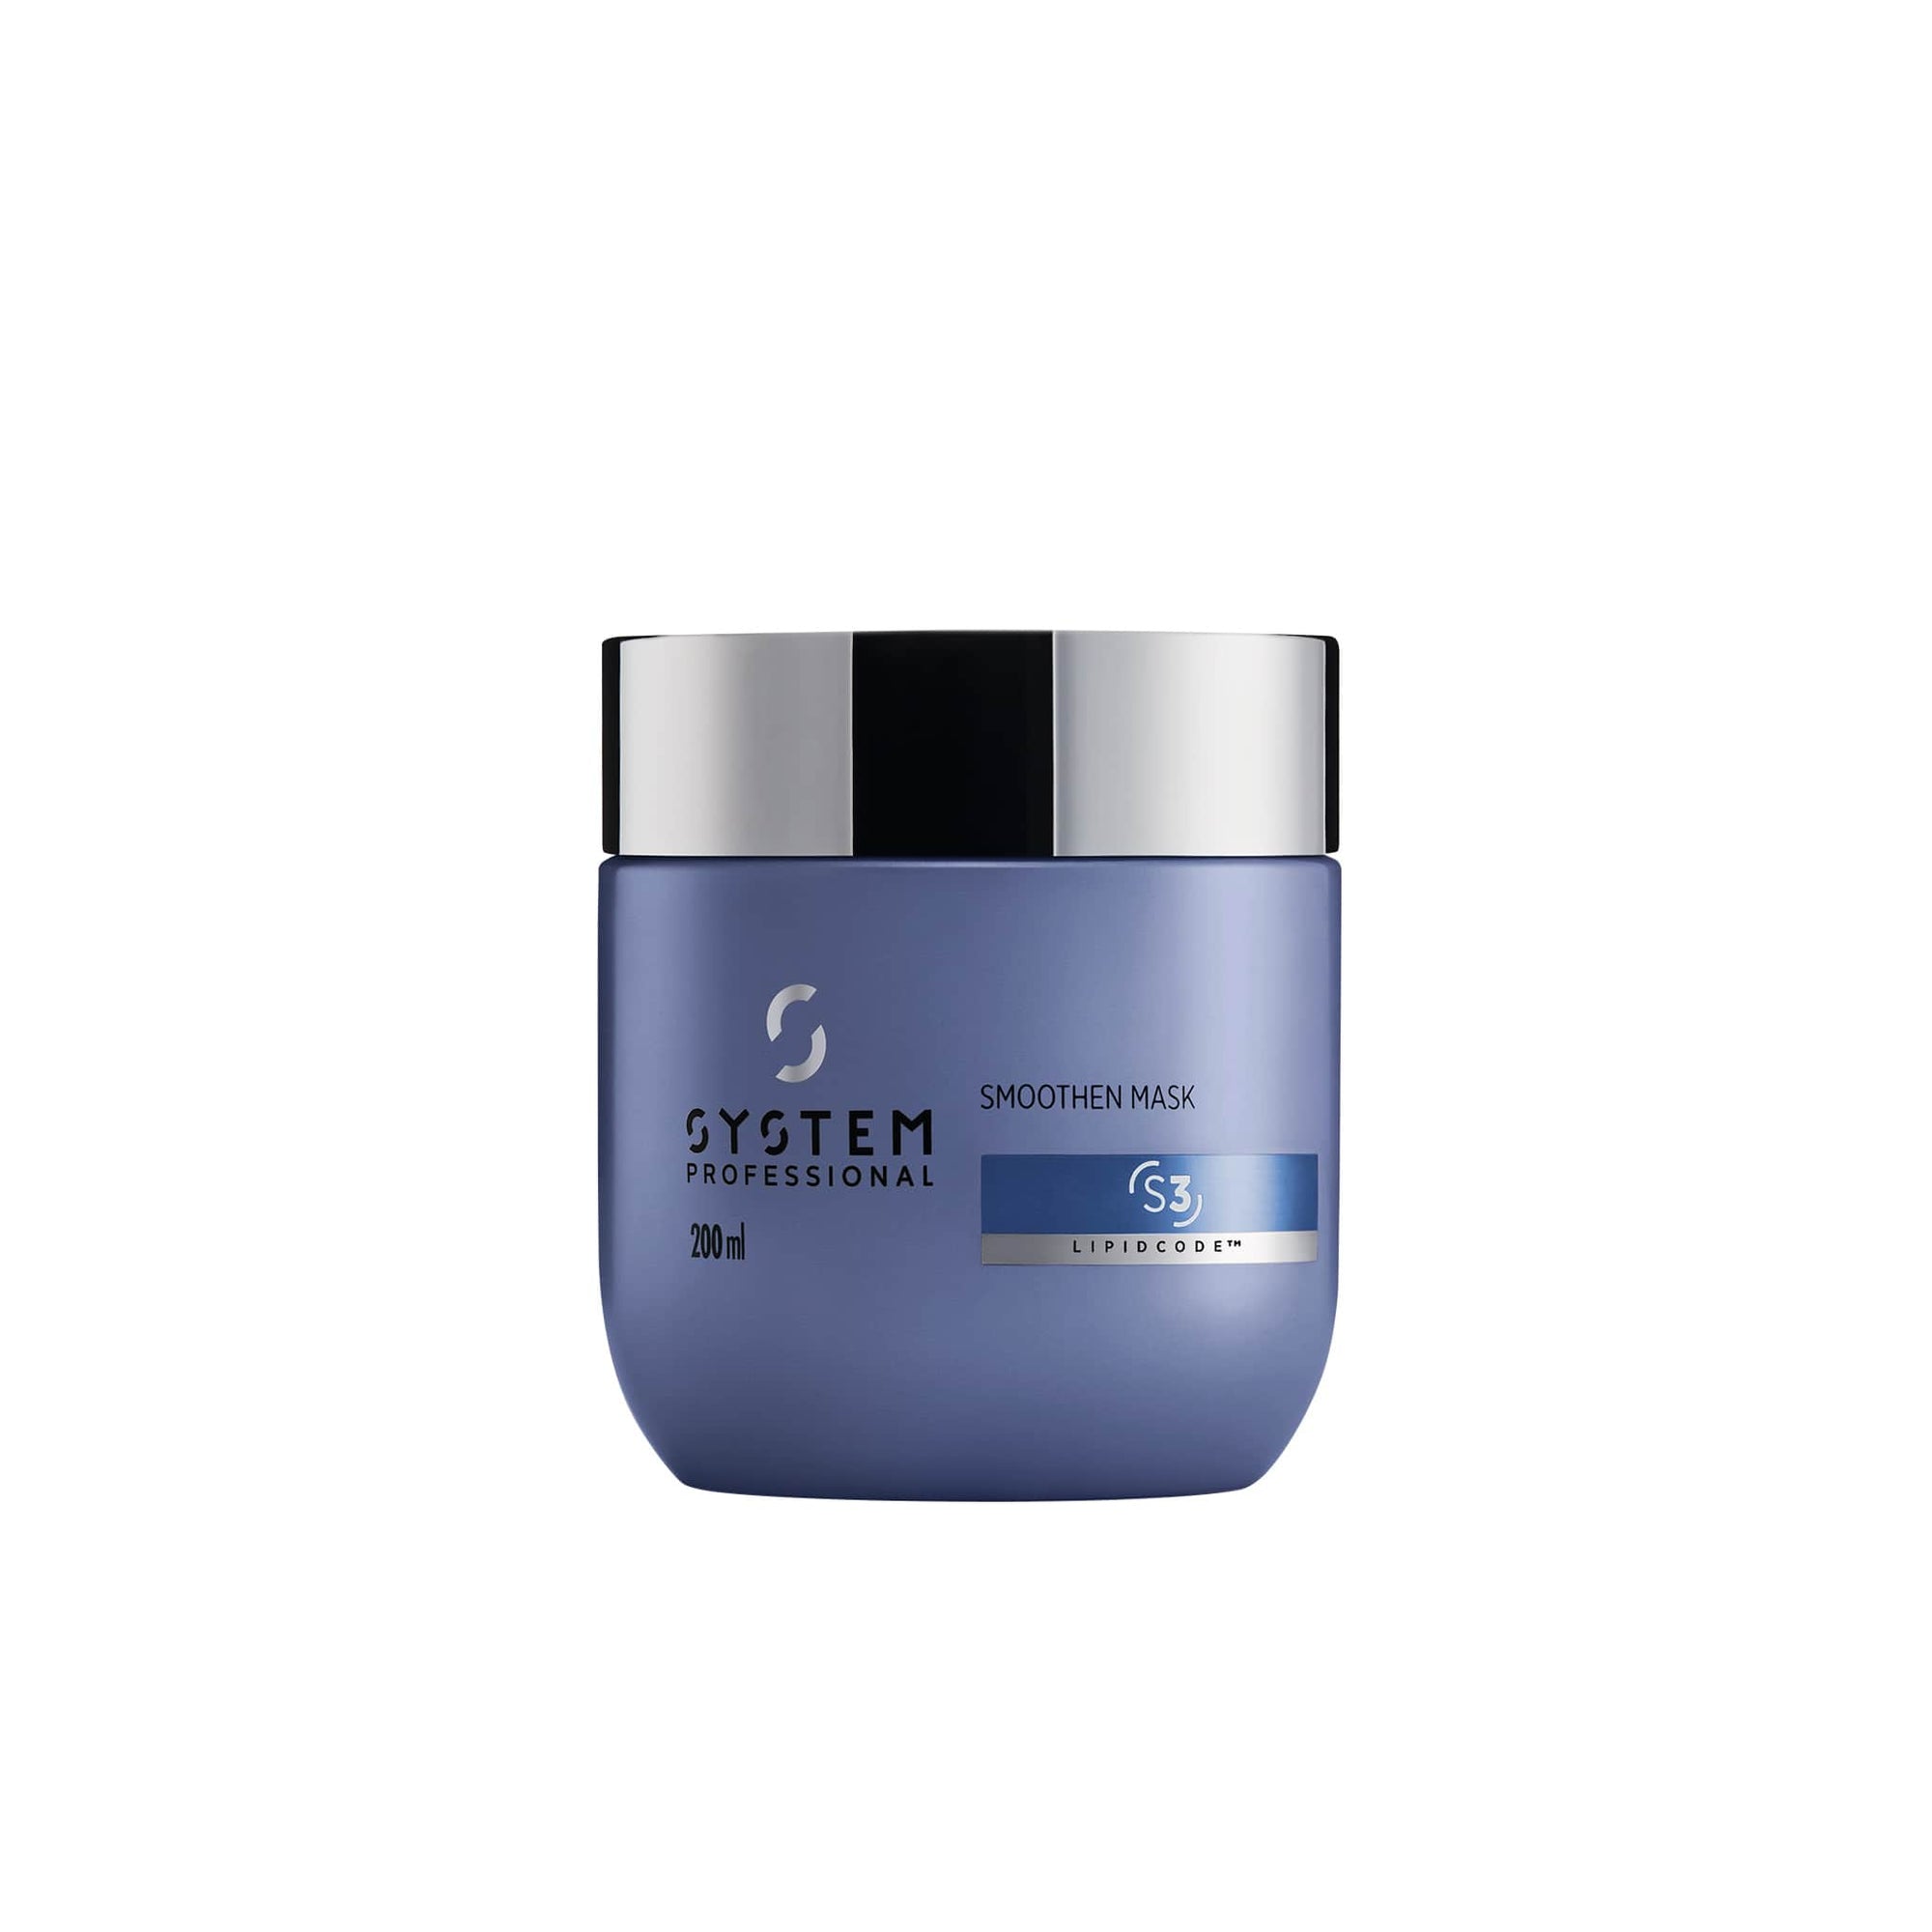 System Professional Smoothen Mask - Shop online | Retail Box